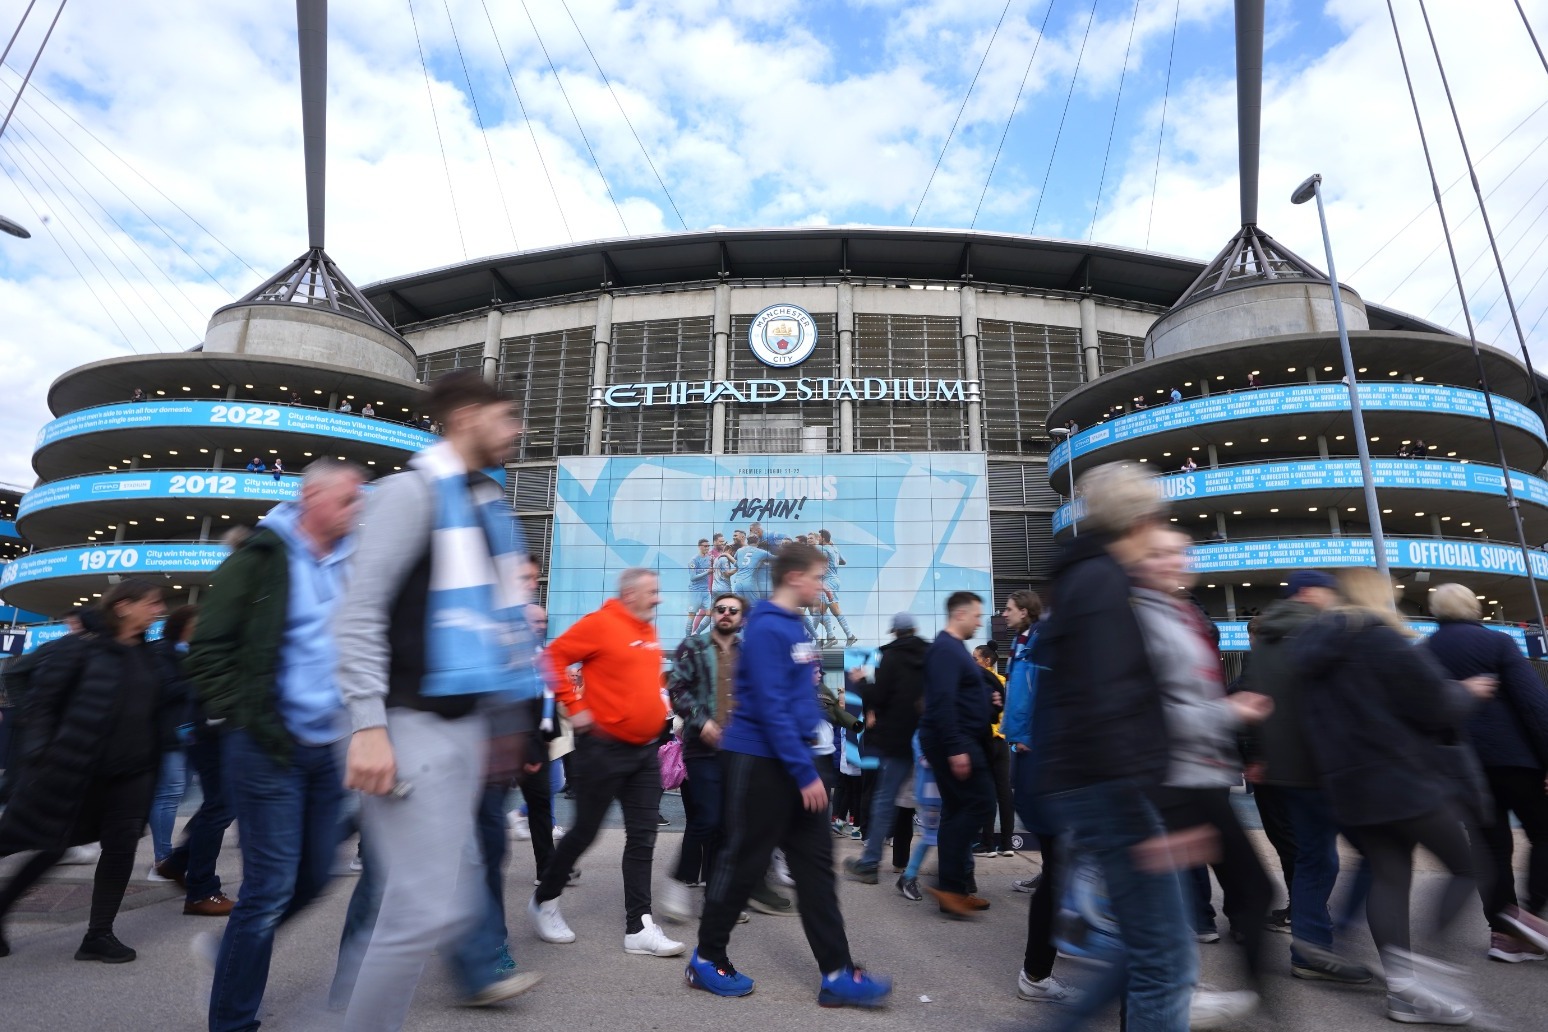 Man City submit plans to expand Etihad Stadium capacity, add hotel and museum 